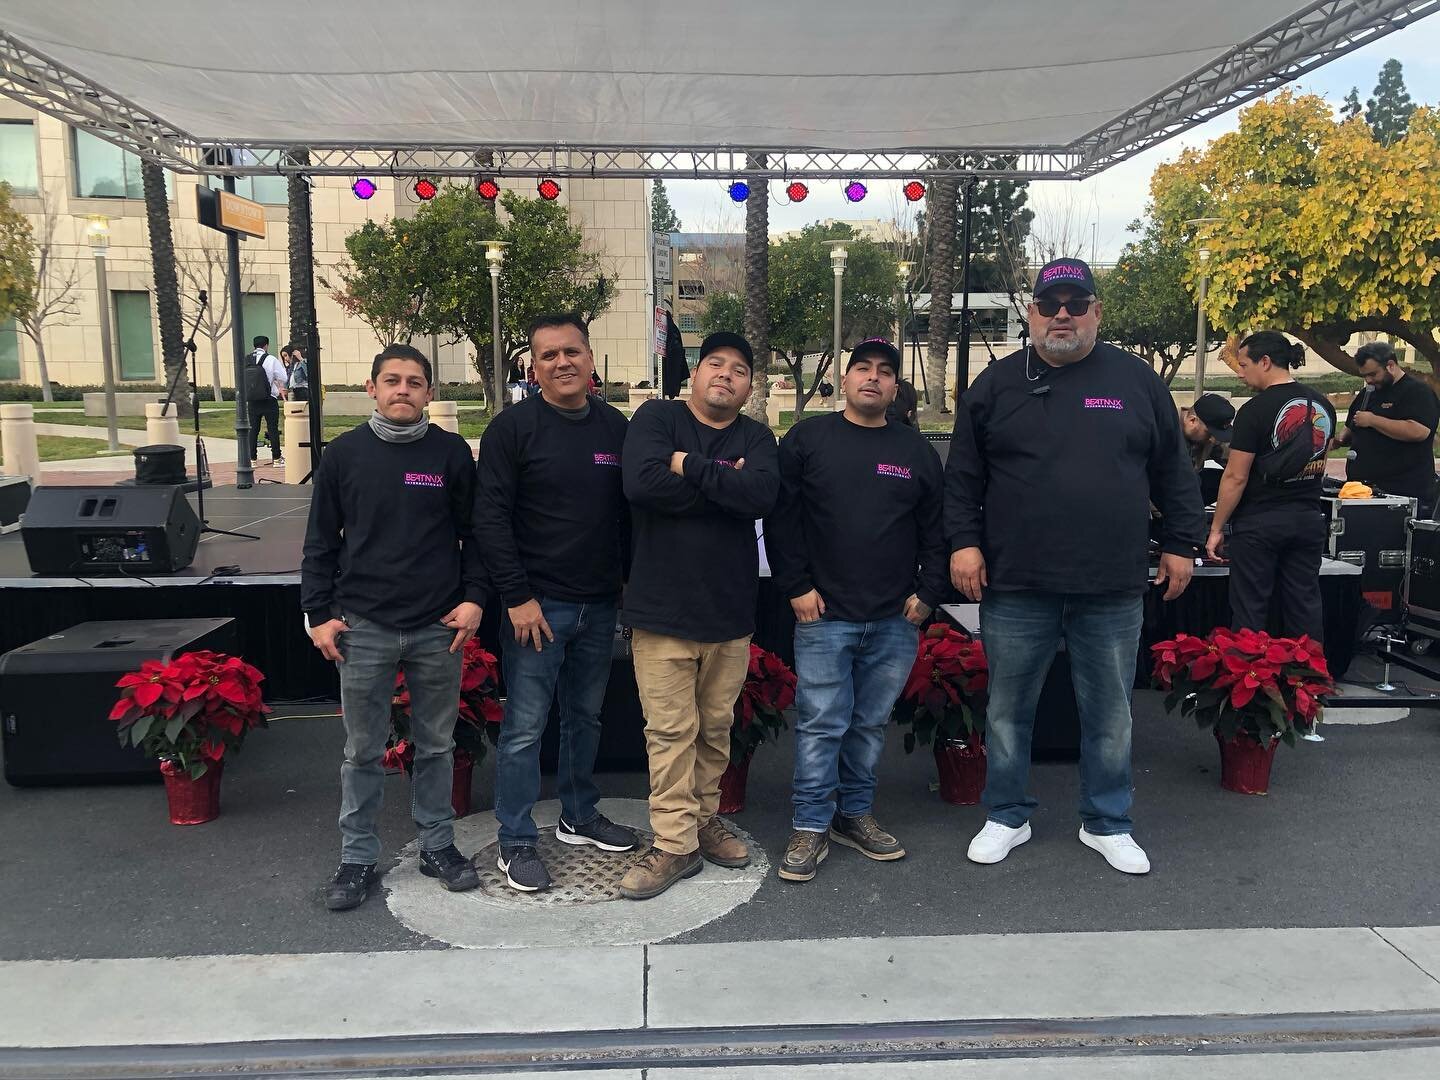 Merry Christmas to the awesome group of people that made the stage and all the behind the scenes stuff possible! We wouldn&rsquo;t be able to do it without them!

👑: @beatmixintl 
#️⃣: #tamalfest #dtsa #santaana #orangecounty